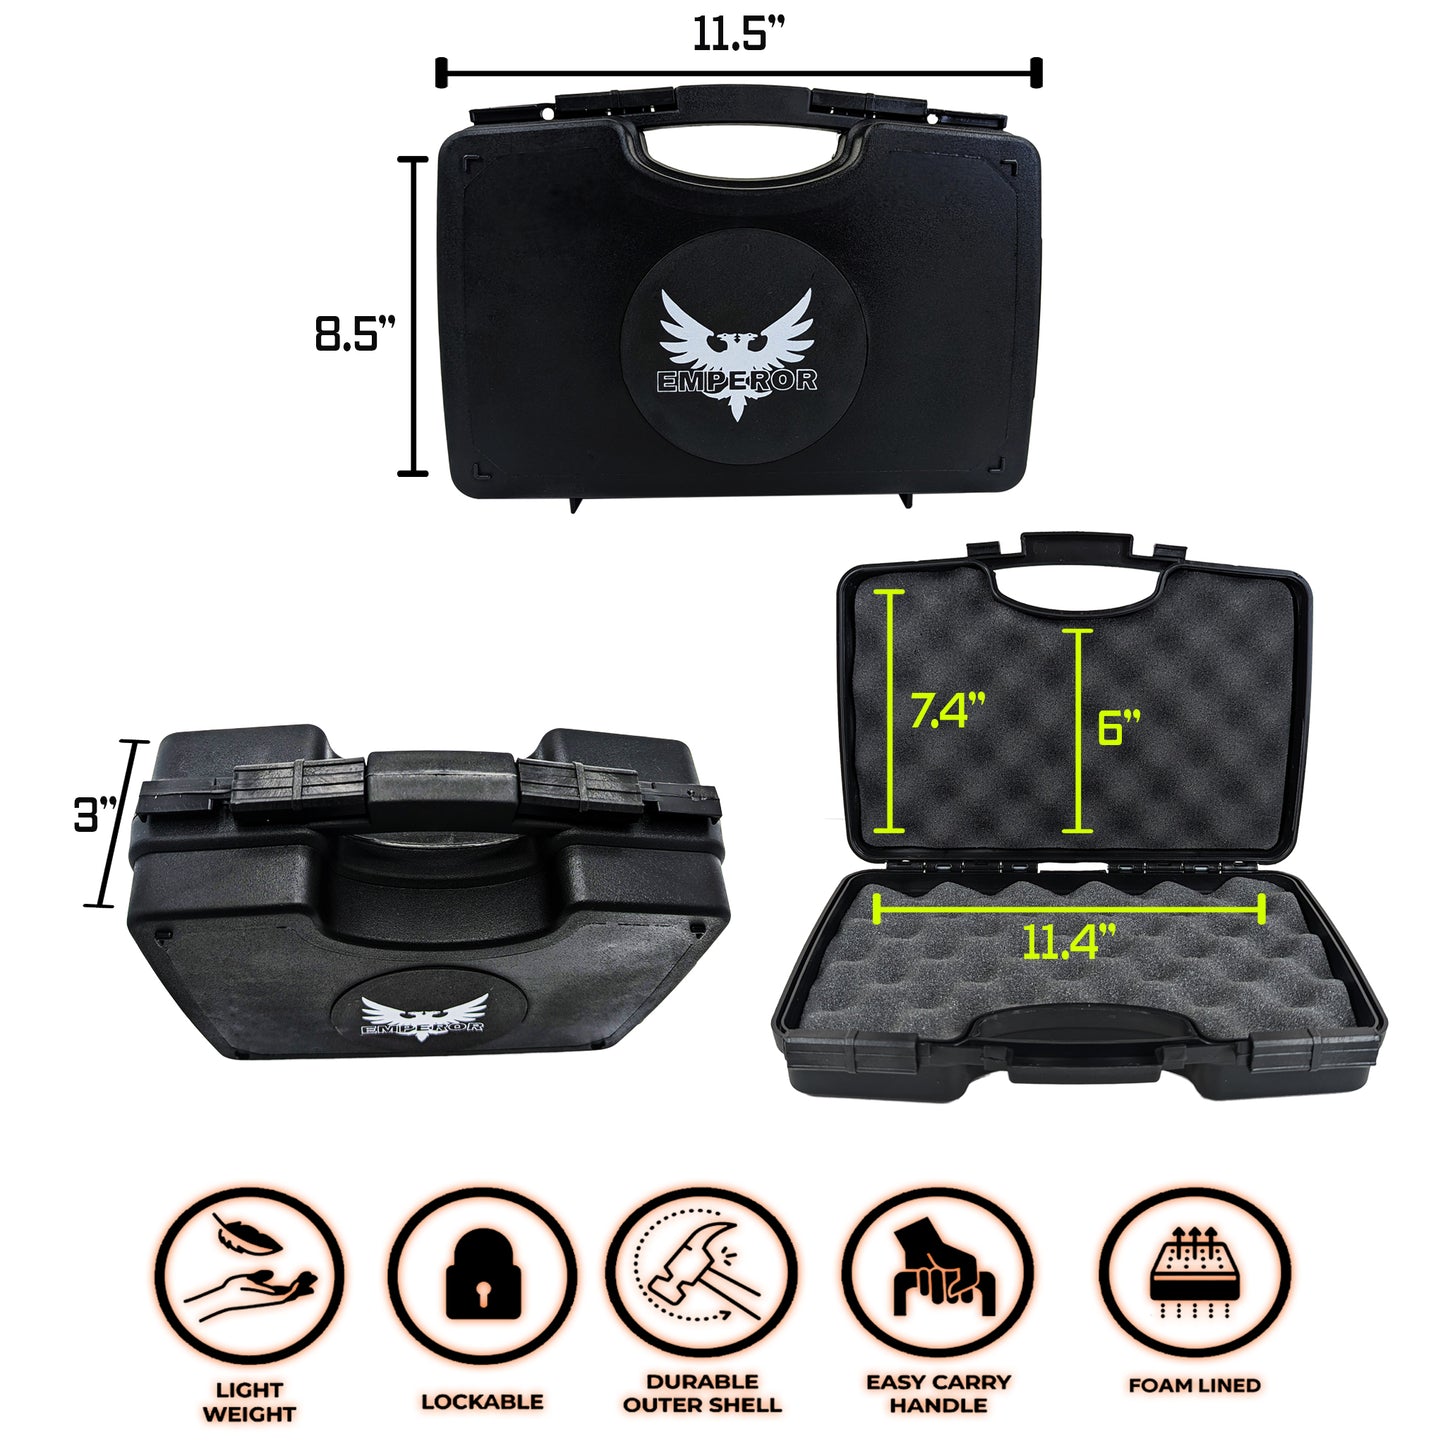 Emperor Arms Pistol Gun Case for Firearms, Handgun Hard Carrying Cases Lockable Storage for Home or Travel, Heavy-Duty with Egg Crate Foam